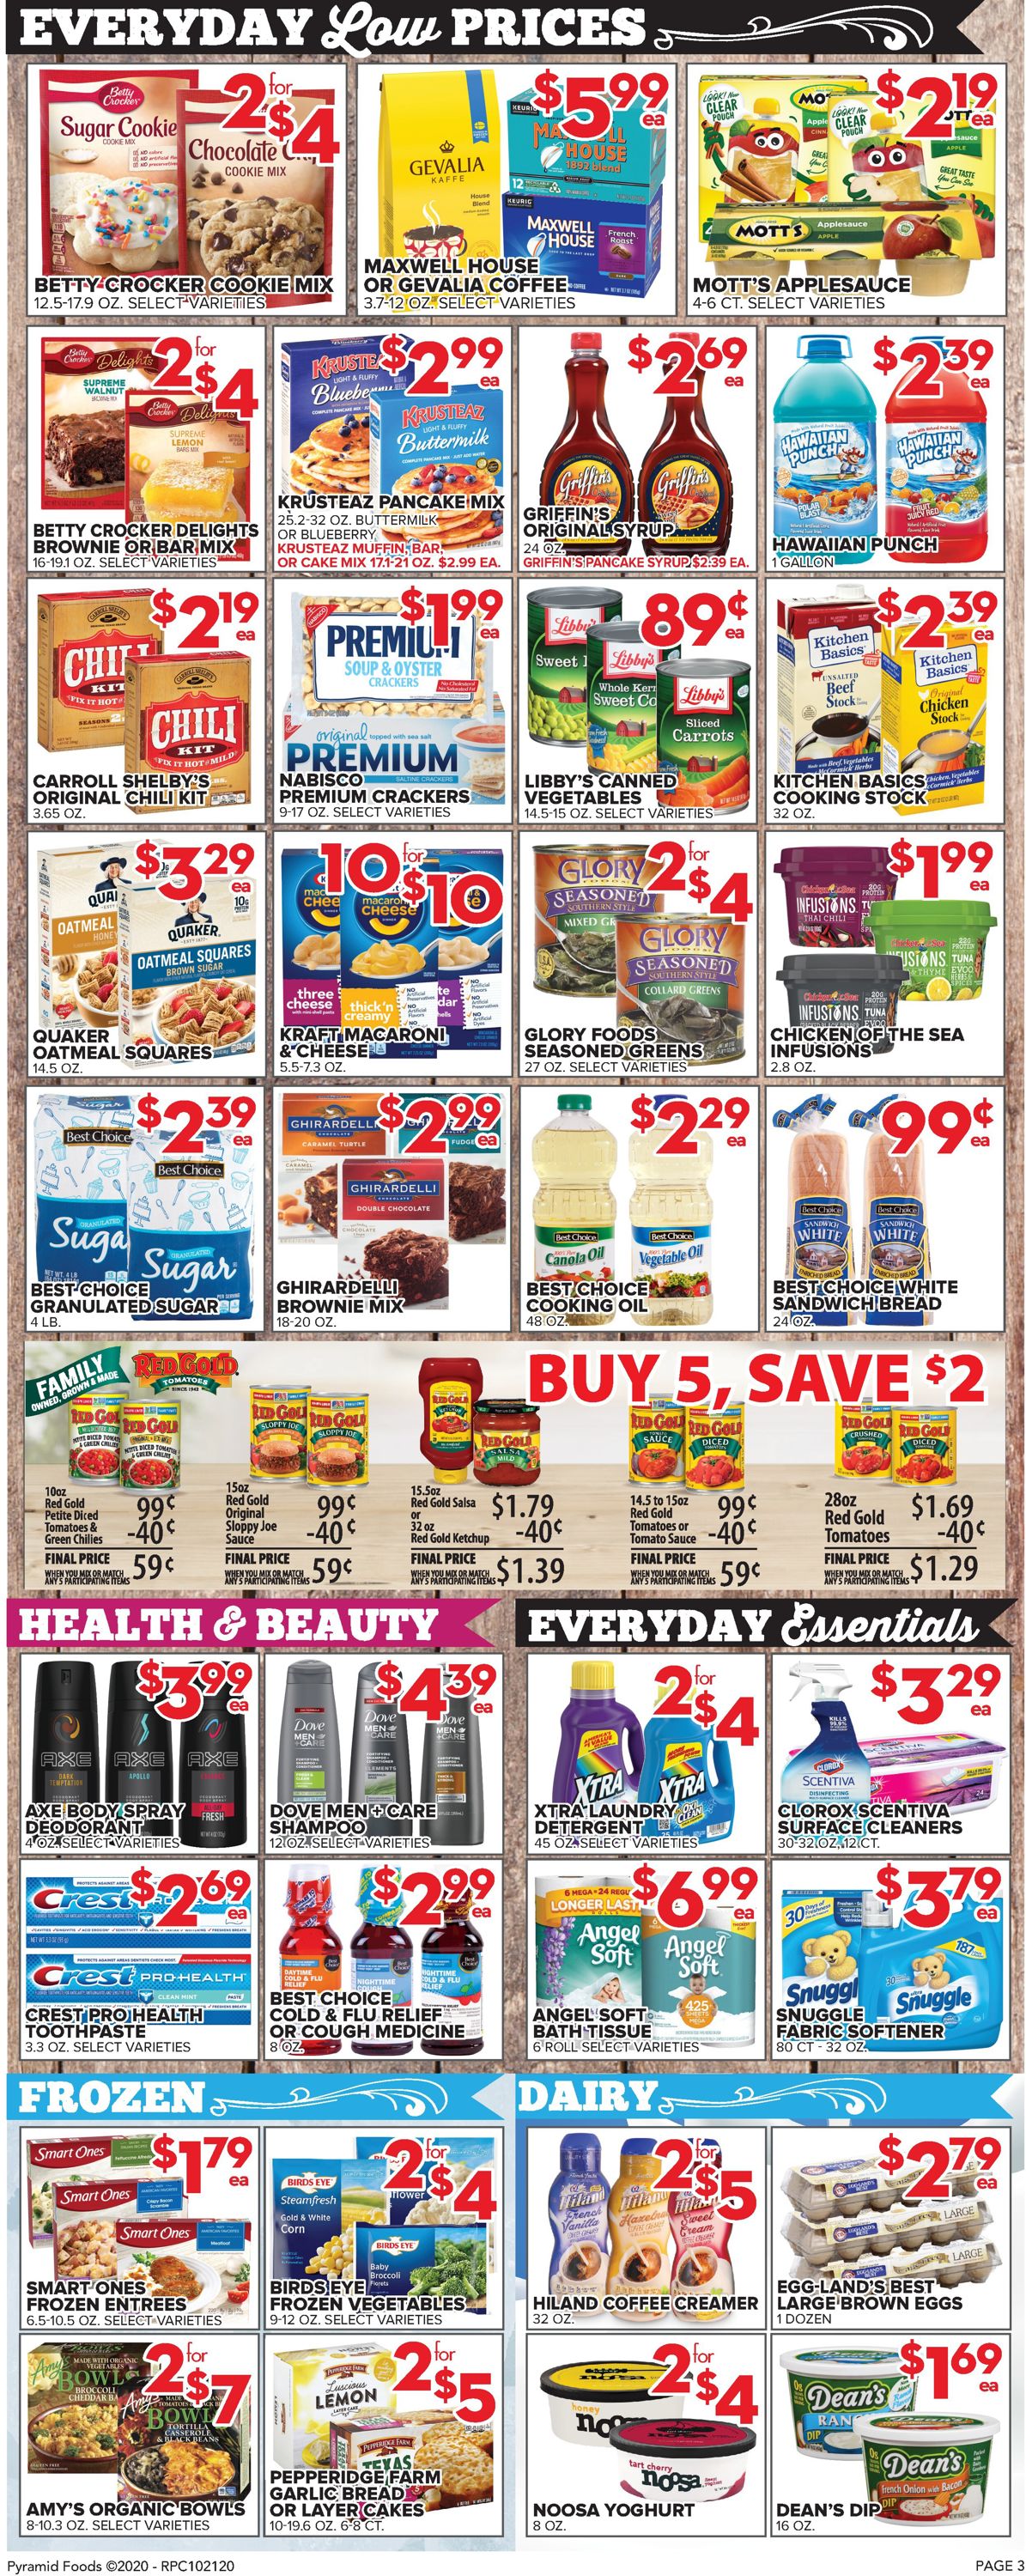 Price Cutter Weekly Ad Circular - valid 10/21-10/27/2020 (Page 3)